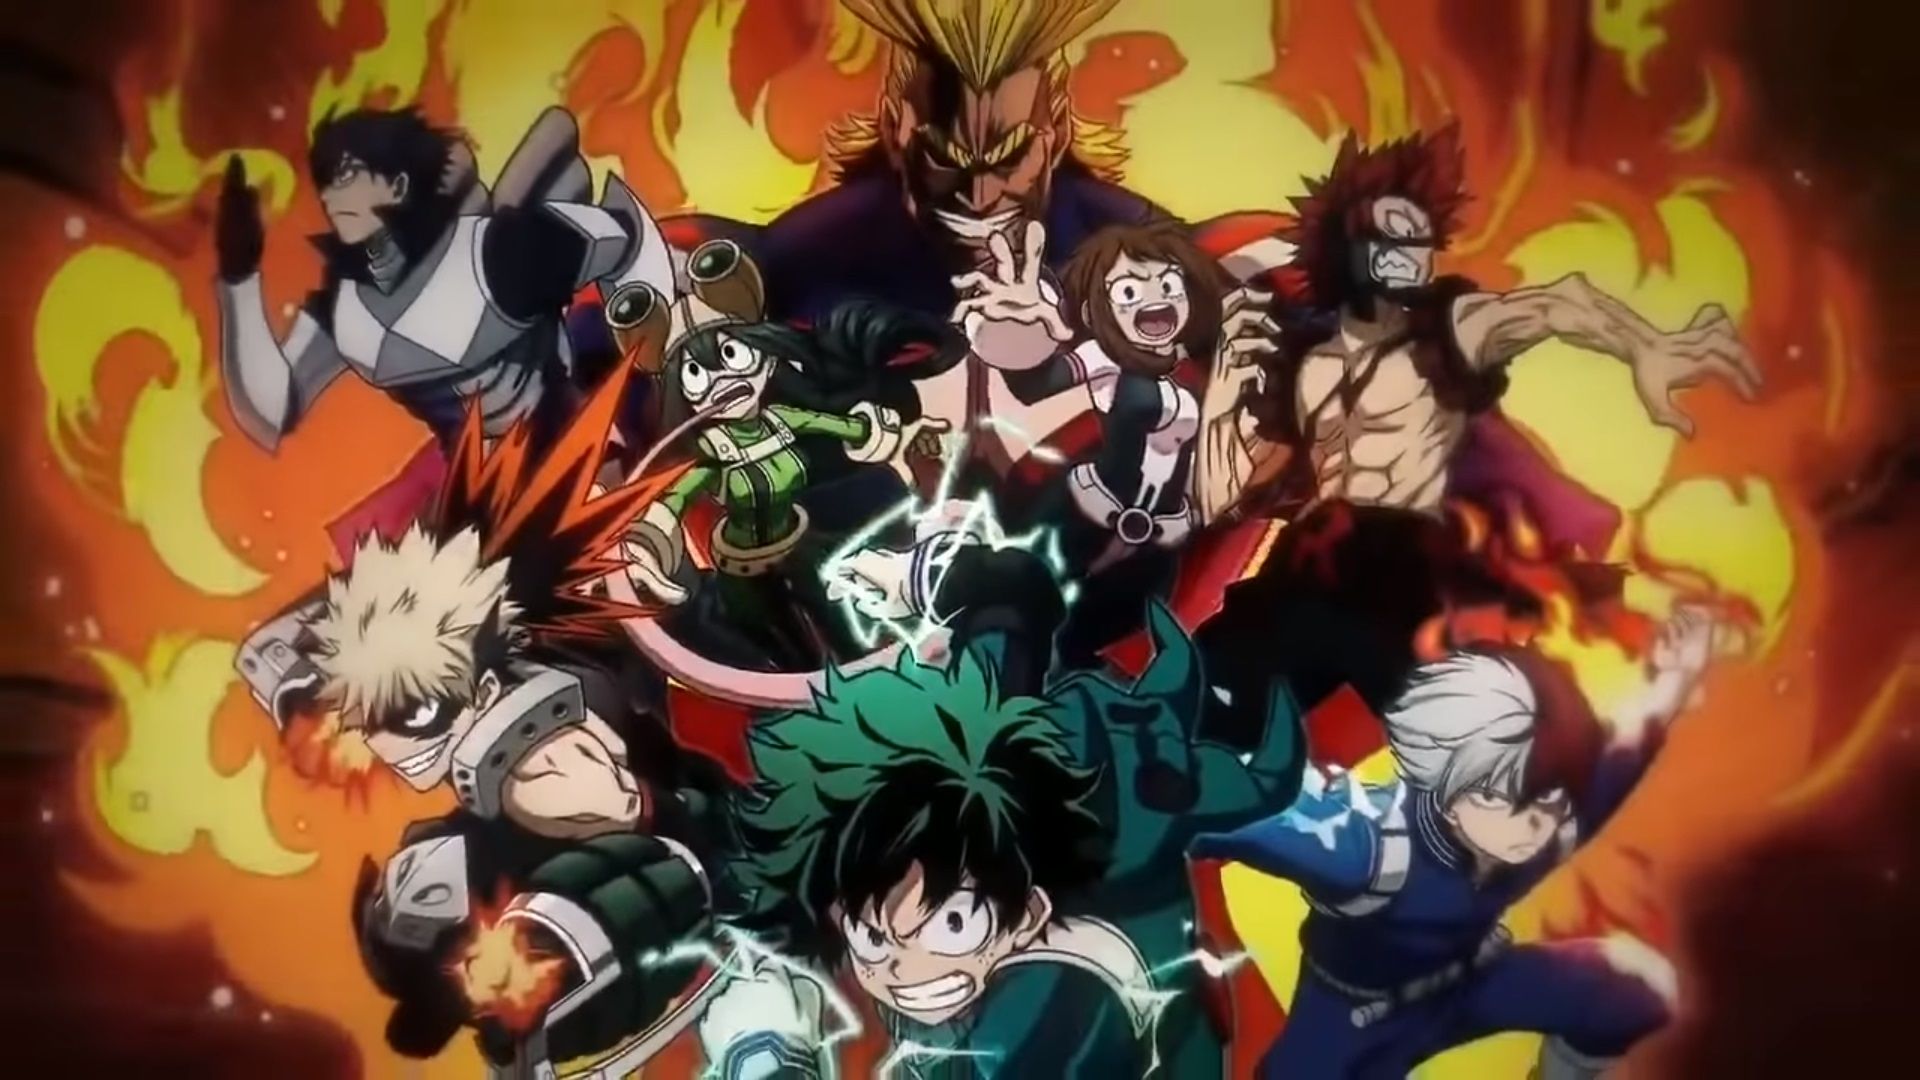 What do you need to know about My Hero Academia?